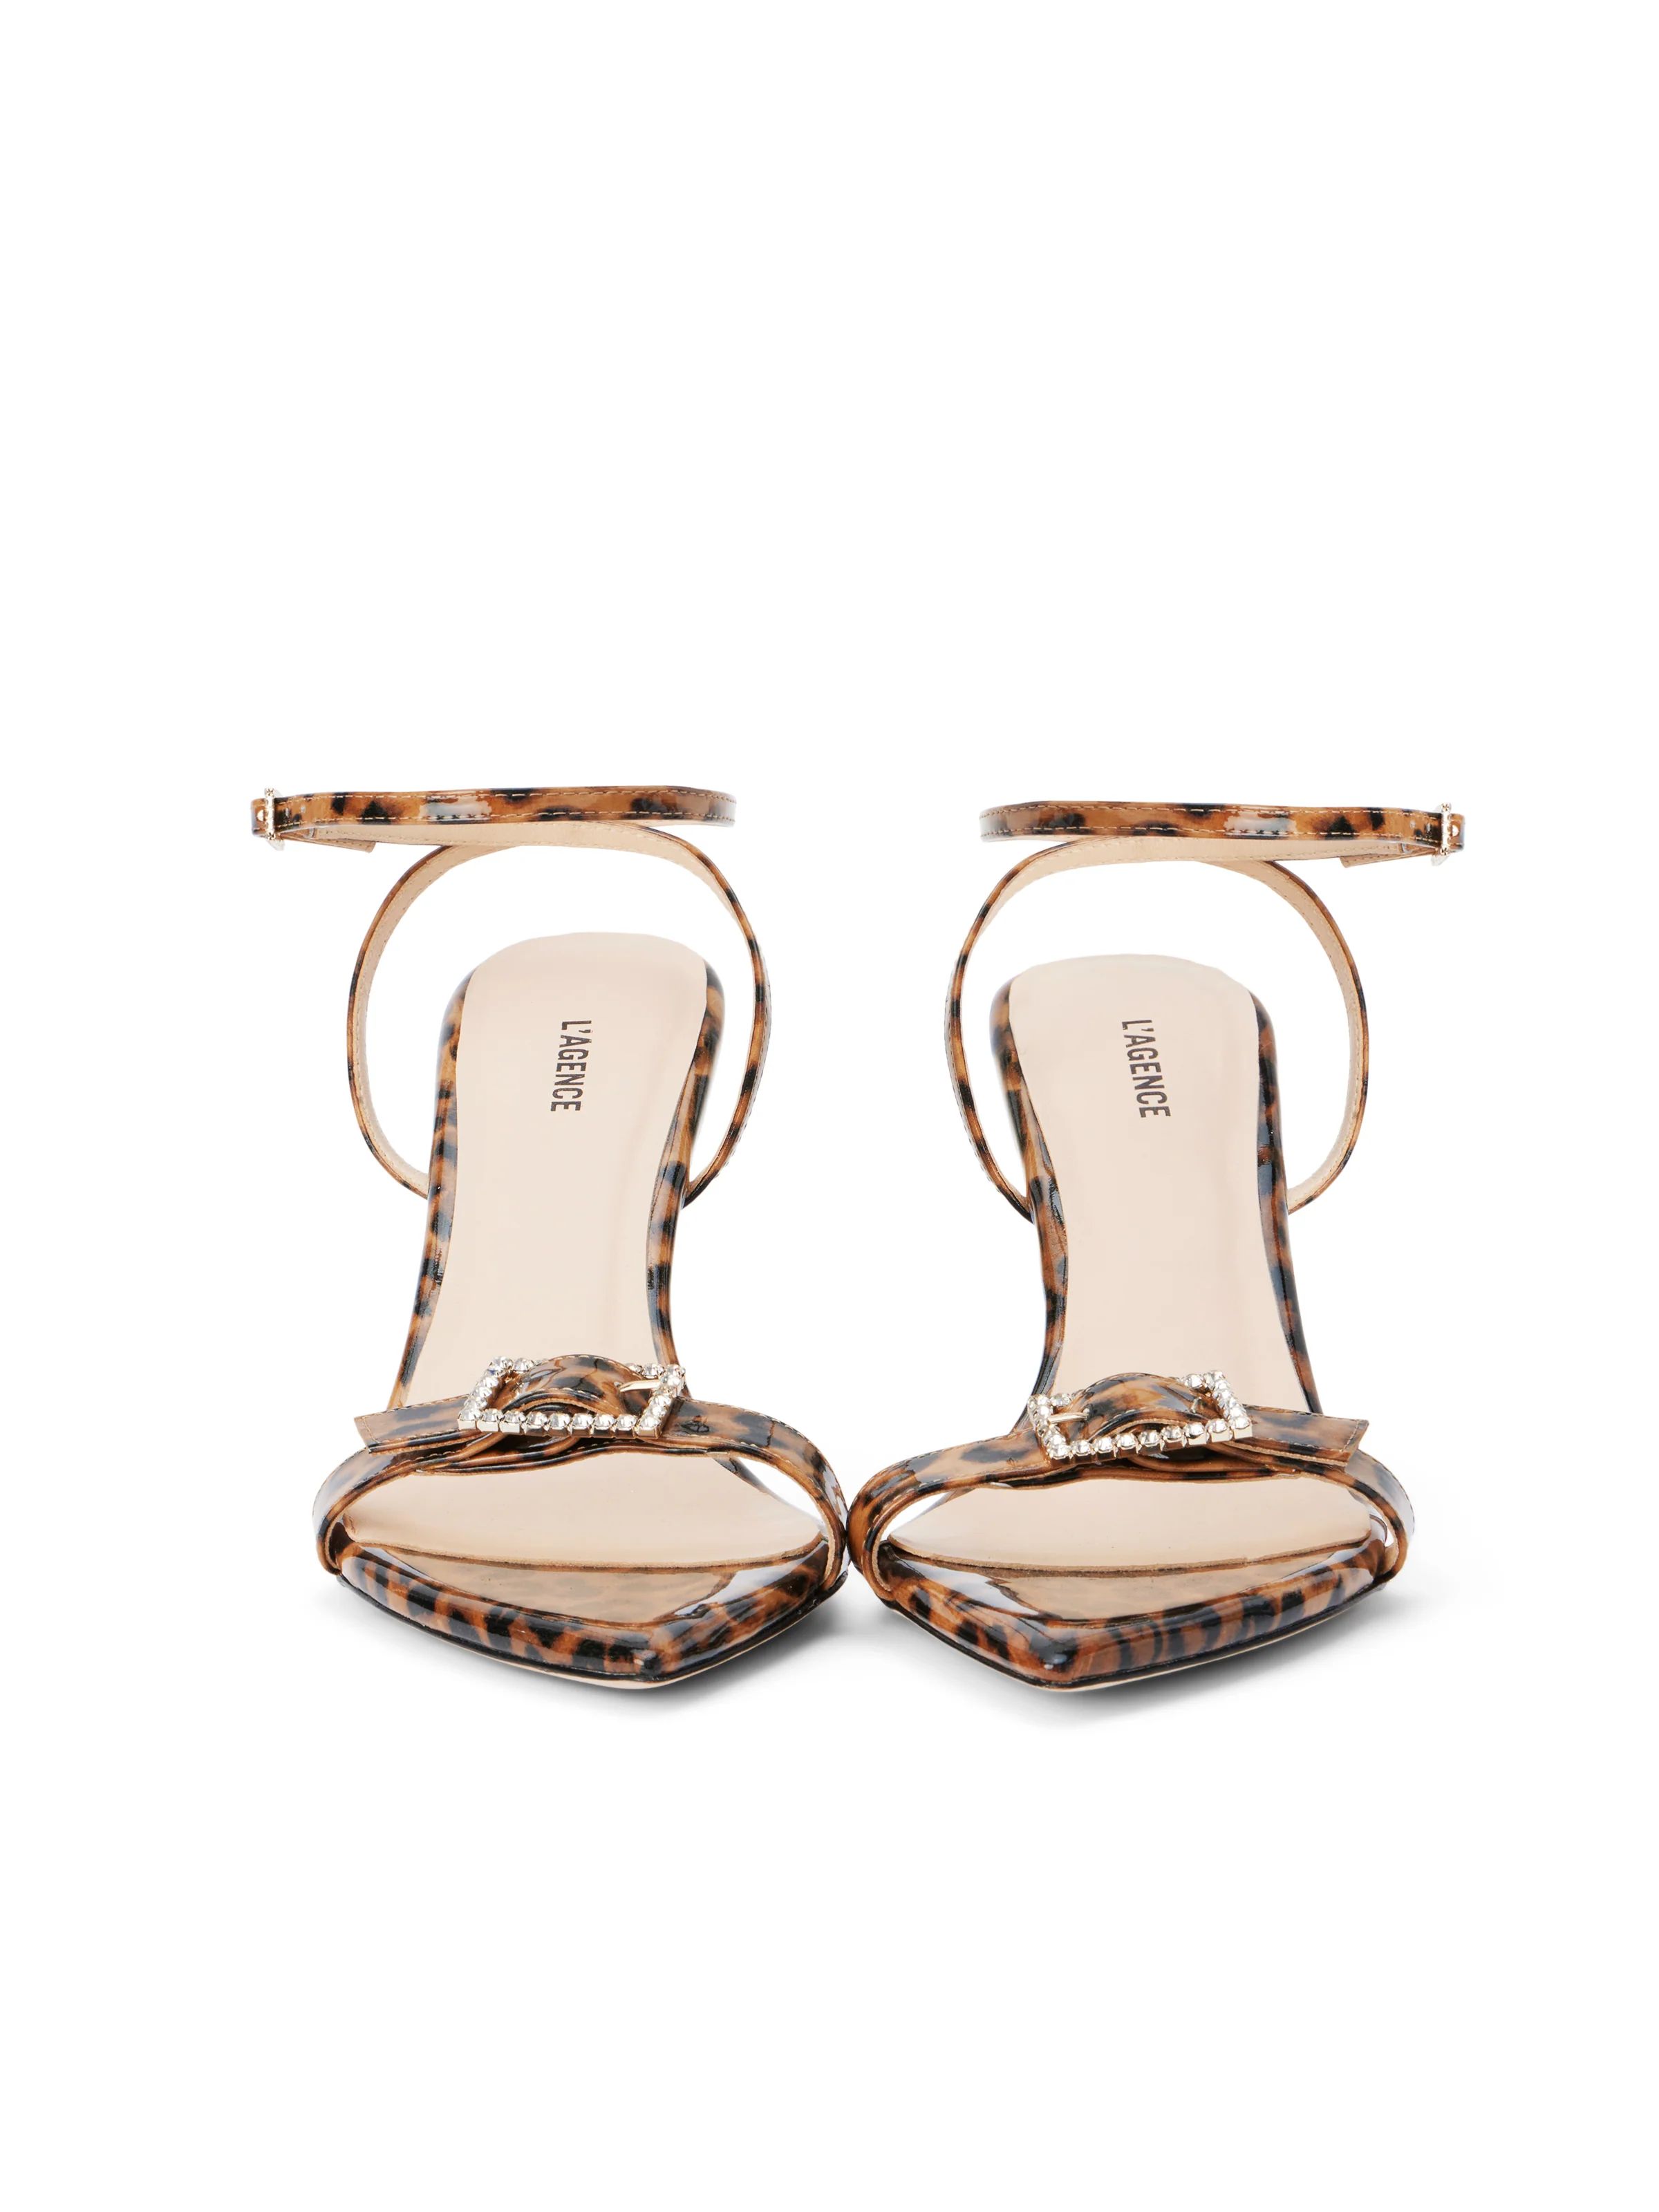 L'AGENCE Juneau Sandal in Leopard Patent Leather | L'Agence